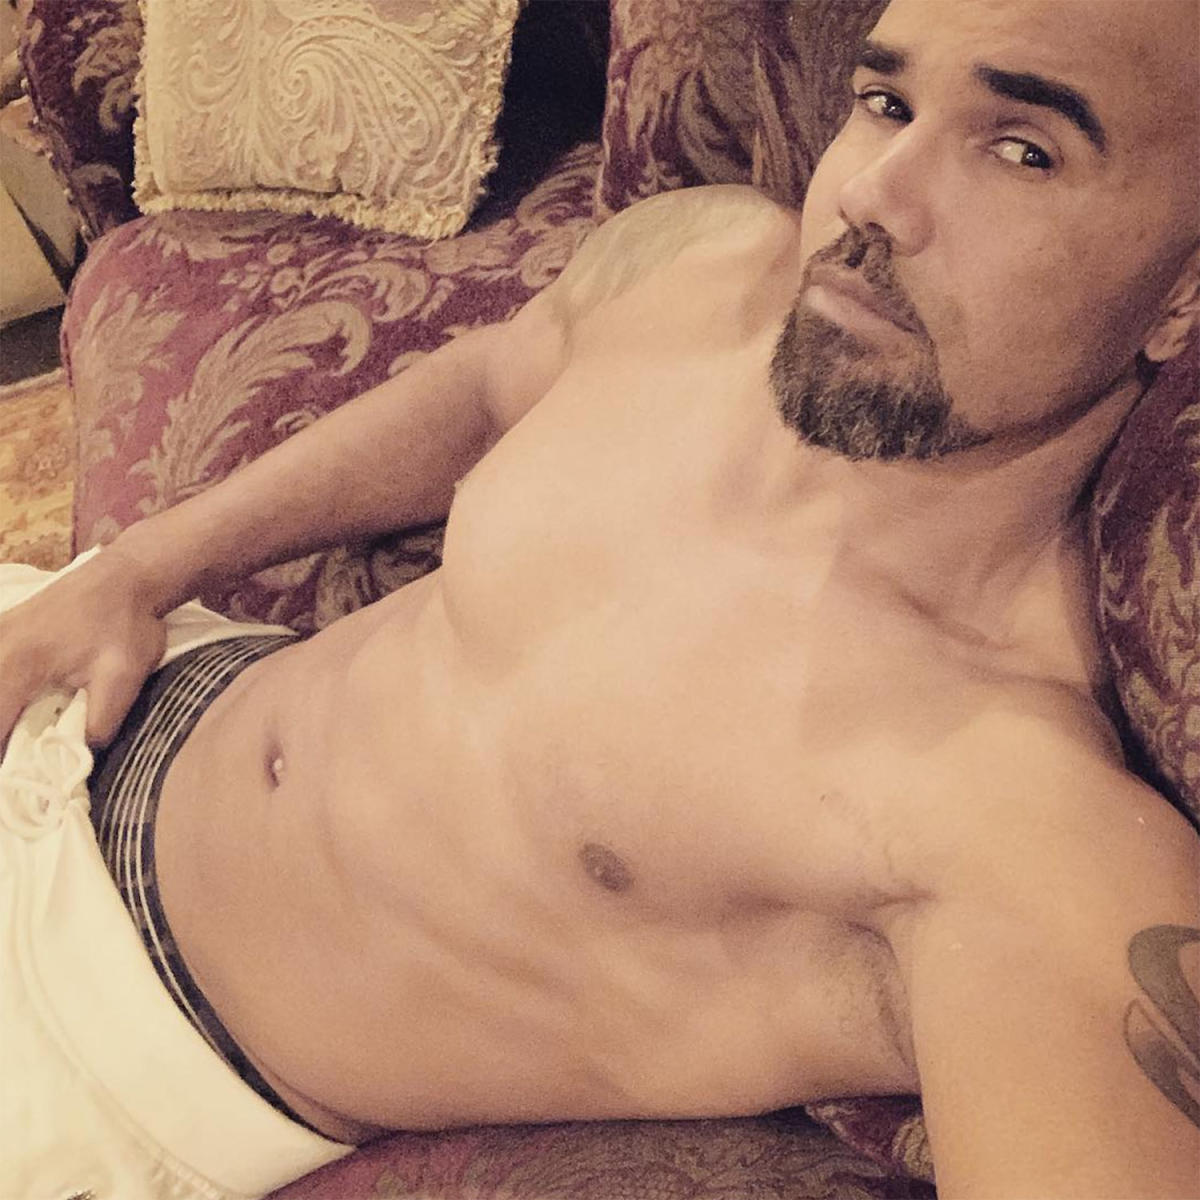 Criminal Minds Alum Shemar Moore Shares Shirtless 2019 Chill Mode Selfie for My Baby Girls pic